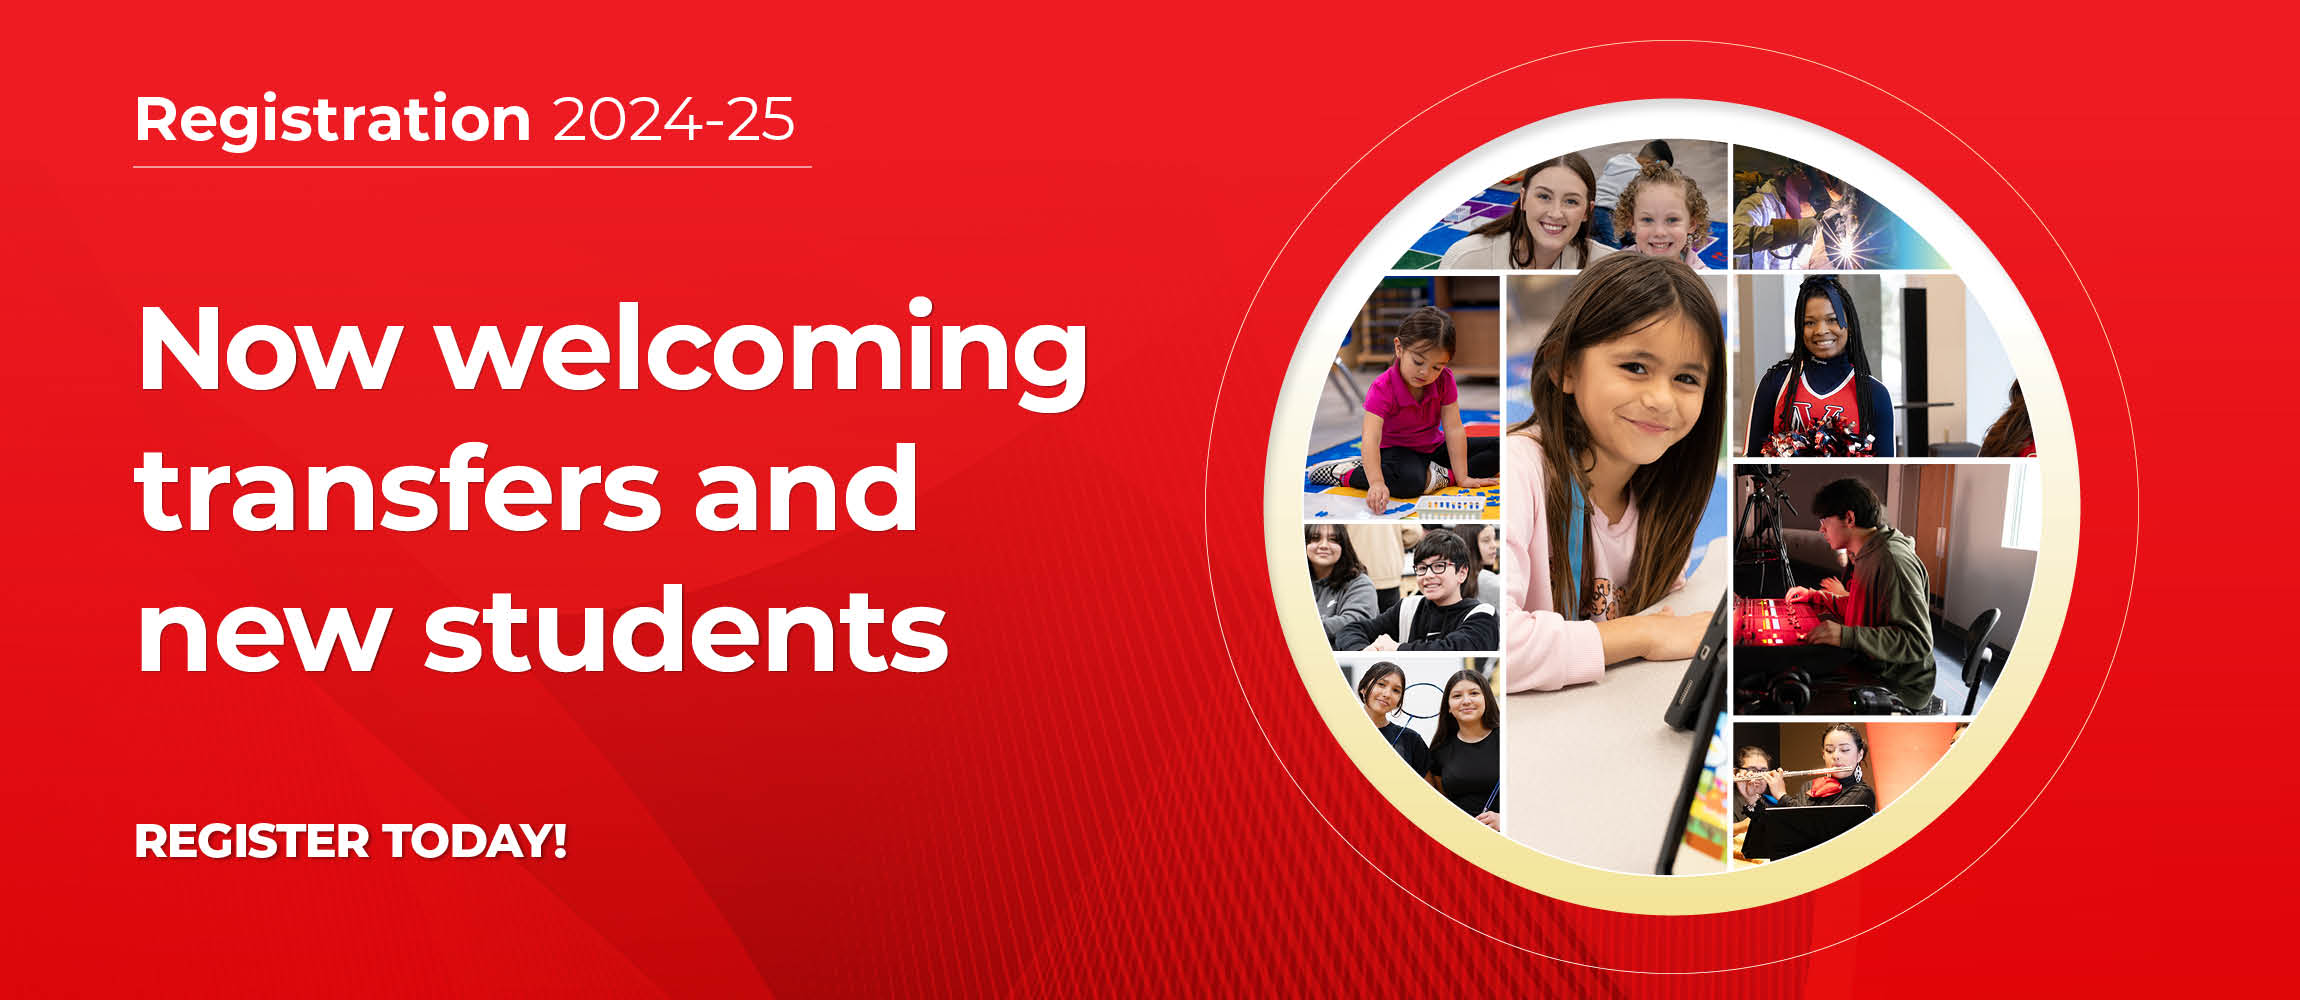 ALT TEXT: Promotional graphic for Corpus Christi ISD announcing that registration opens on February 1st for new students. The graphic is red and white with a wave-like design separating the text and the images. On the right, there are images of students and teachers engaged in various activities: two girls smiling at the camera, a pre-K student using building blocks on the floor, a middle schooler with glasses smiling in a classroom, a high schooler using welding equipment, a student operating audio equipment, and a student playing the flute.